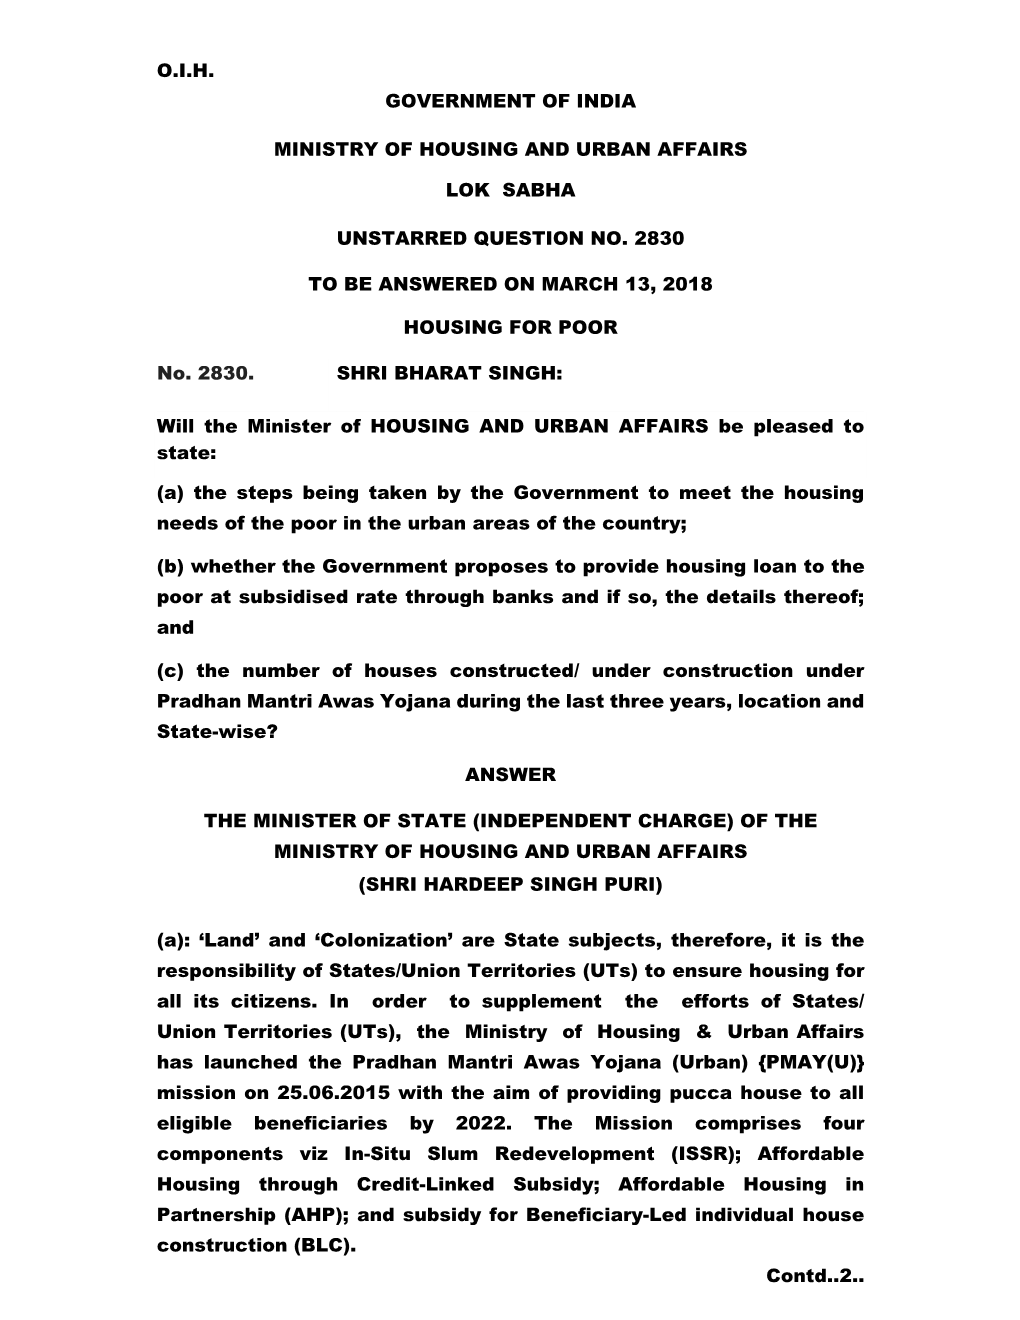 O.I.H. Government of India Ministry of Housing and Urban Affairs Lok Sabha Unstarred Question No. 2830 to Be Answered on March